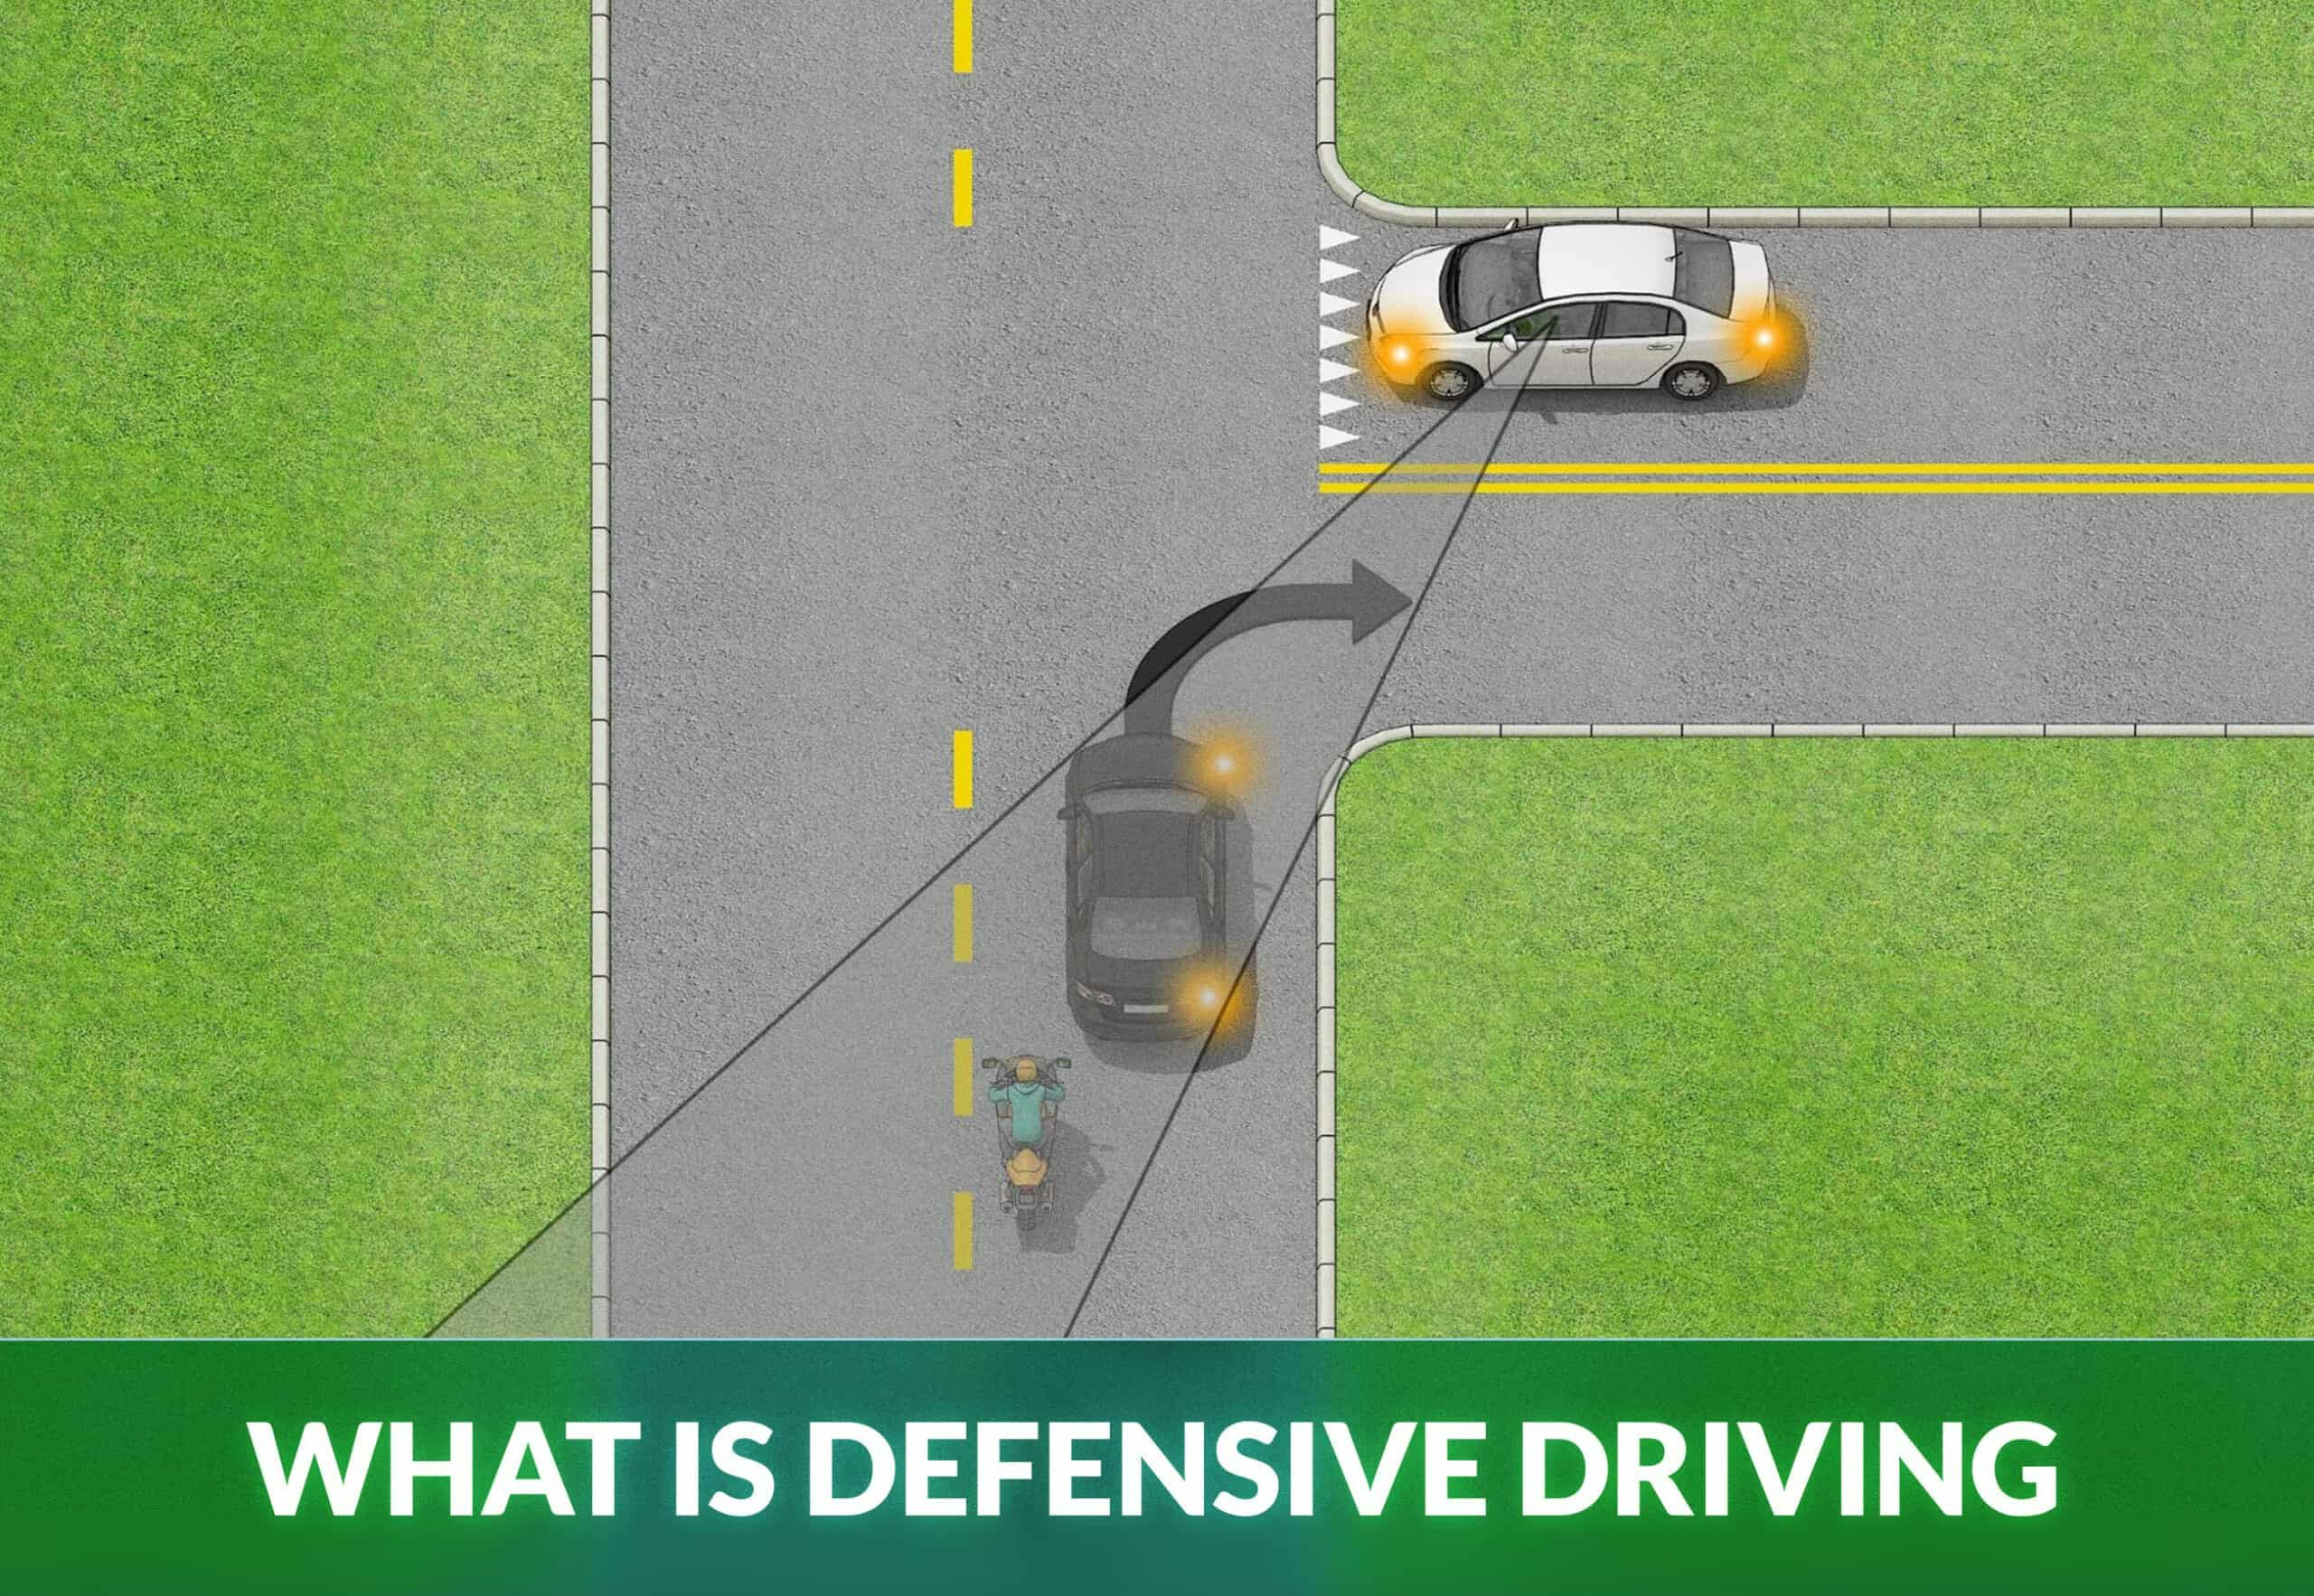 What Is Defensive Driving 6 Tips How To Drive Defensively